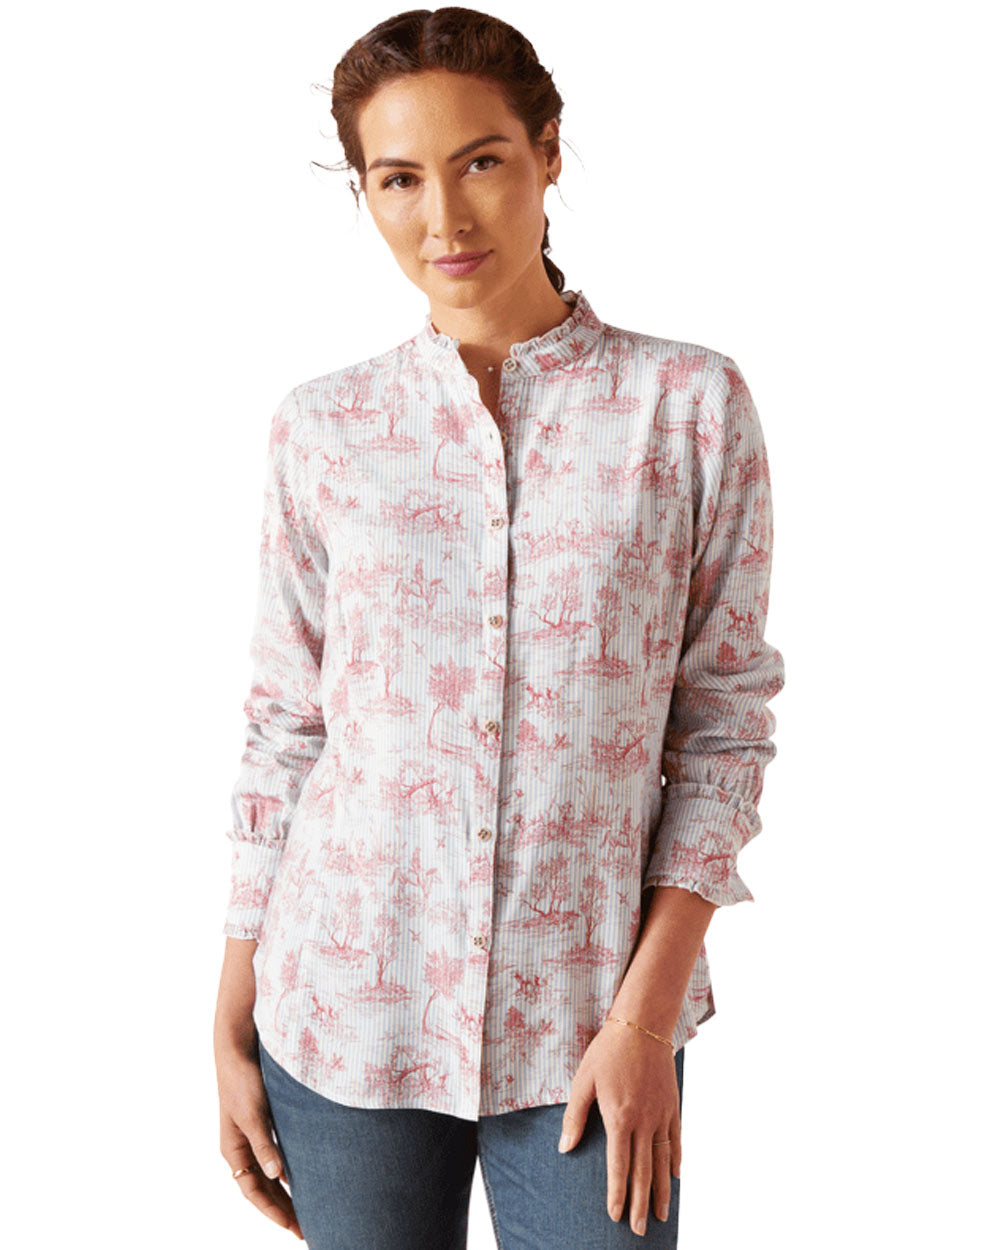 Blue Toile Ariat Womens Clarion Blouse on White background 